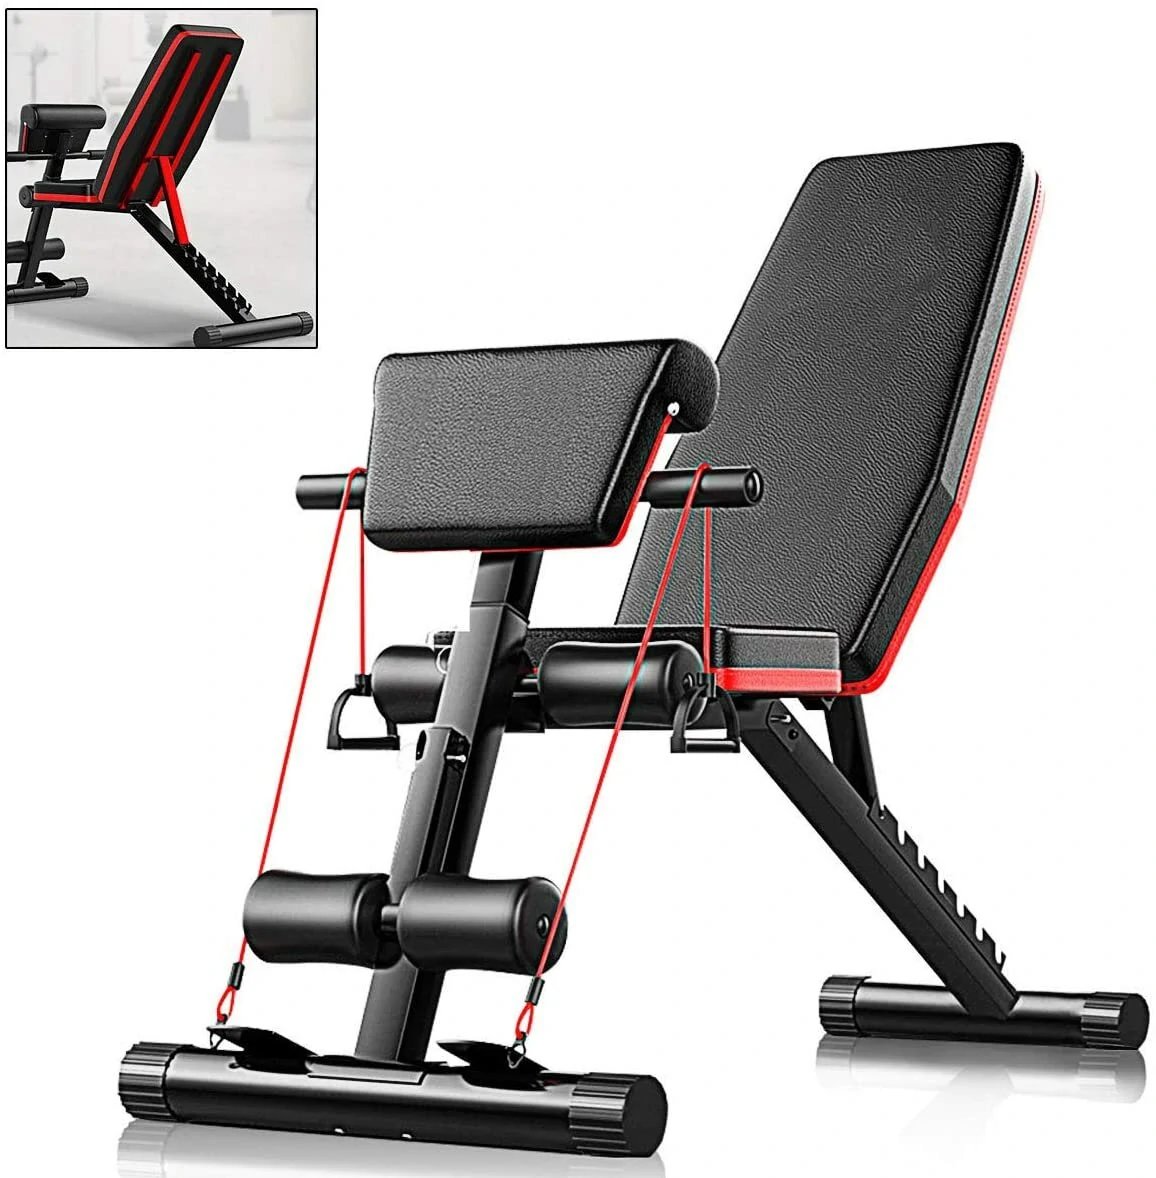 5-in-1 Gym Bench Multifunctional Supine Board Foldable Abdominal Training Machine Bodybuilding Home Fitness Equipment